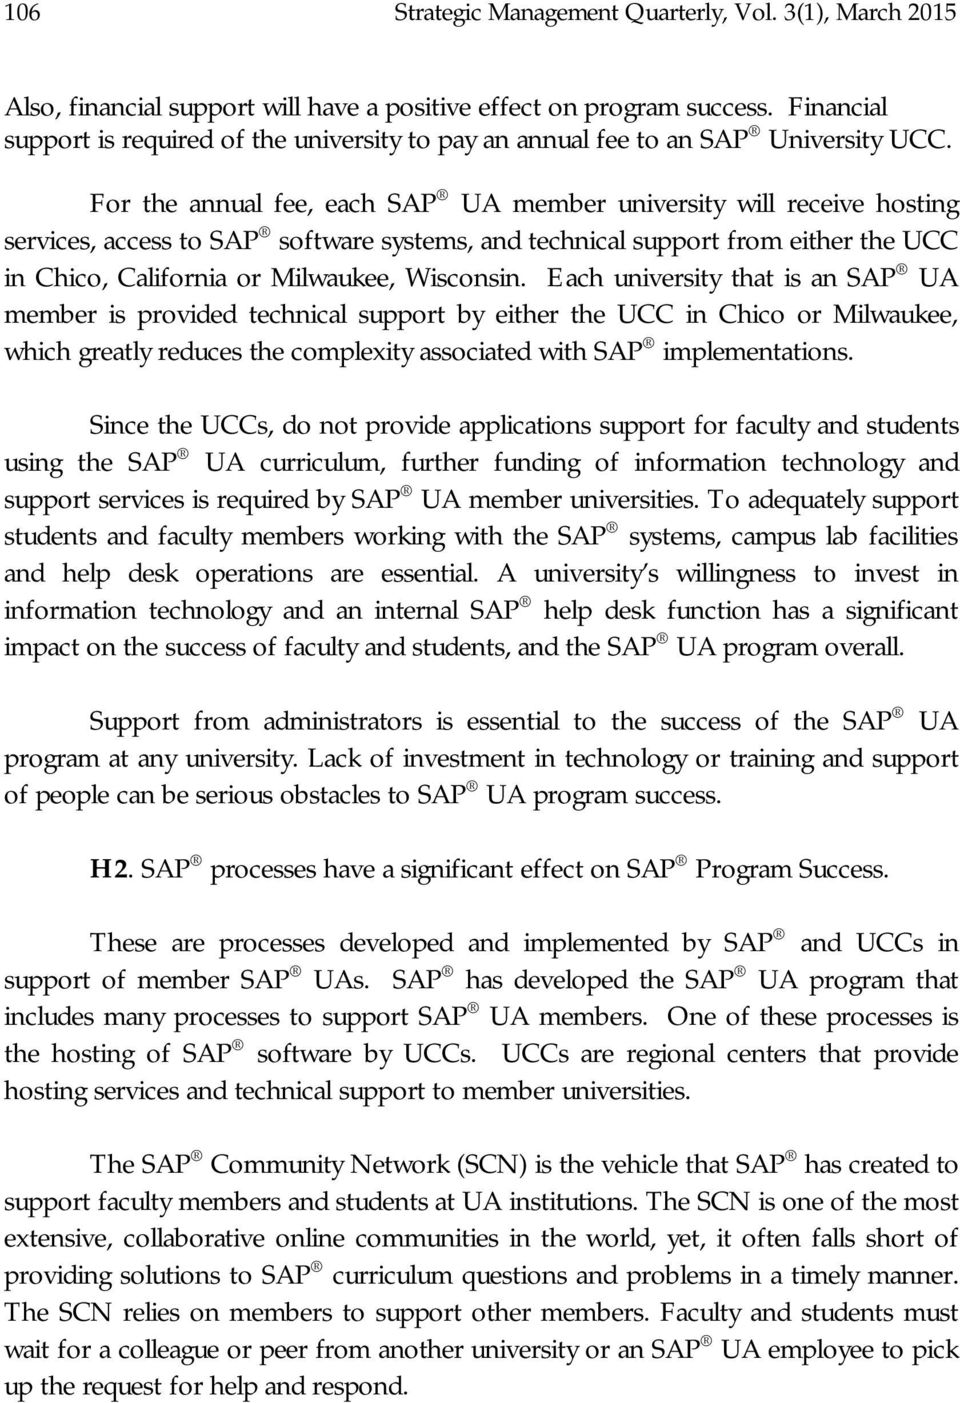 For the annual fee, each SAP UA member university will receive hosting services, access to SAP software systems, and technical support from either the UCC in Chico, California or Milwaukee, Wisconsin.